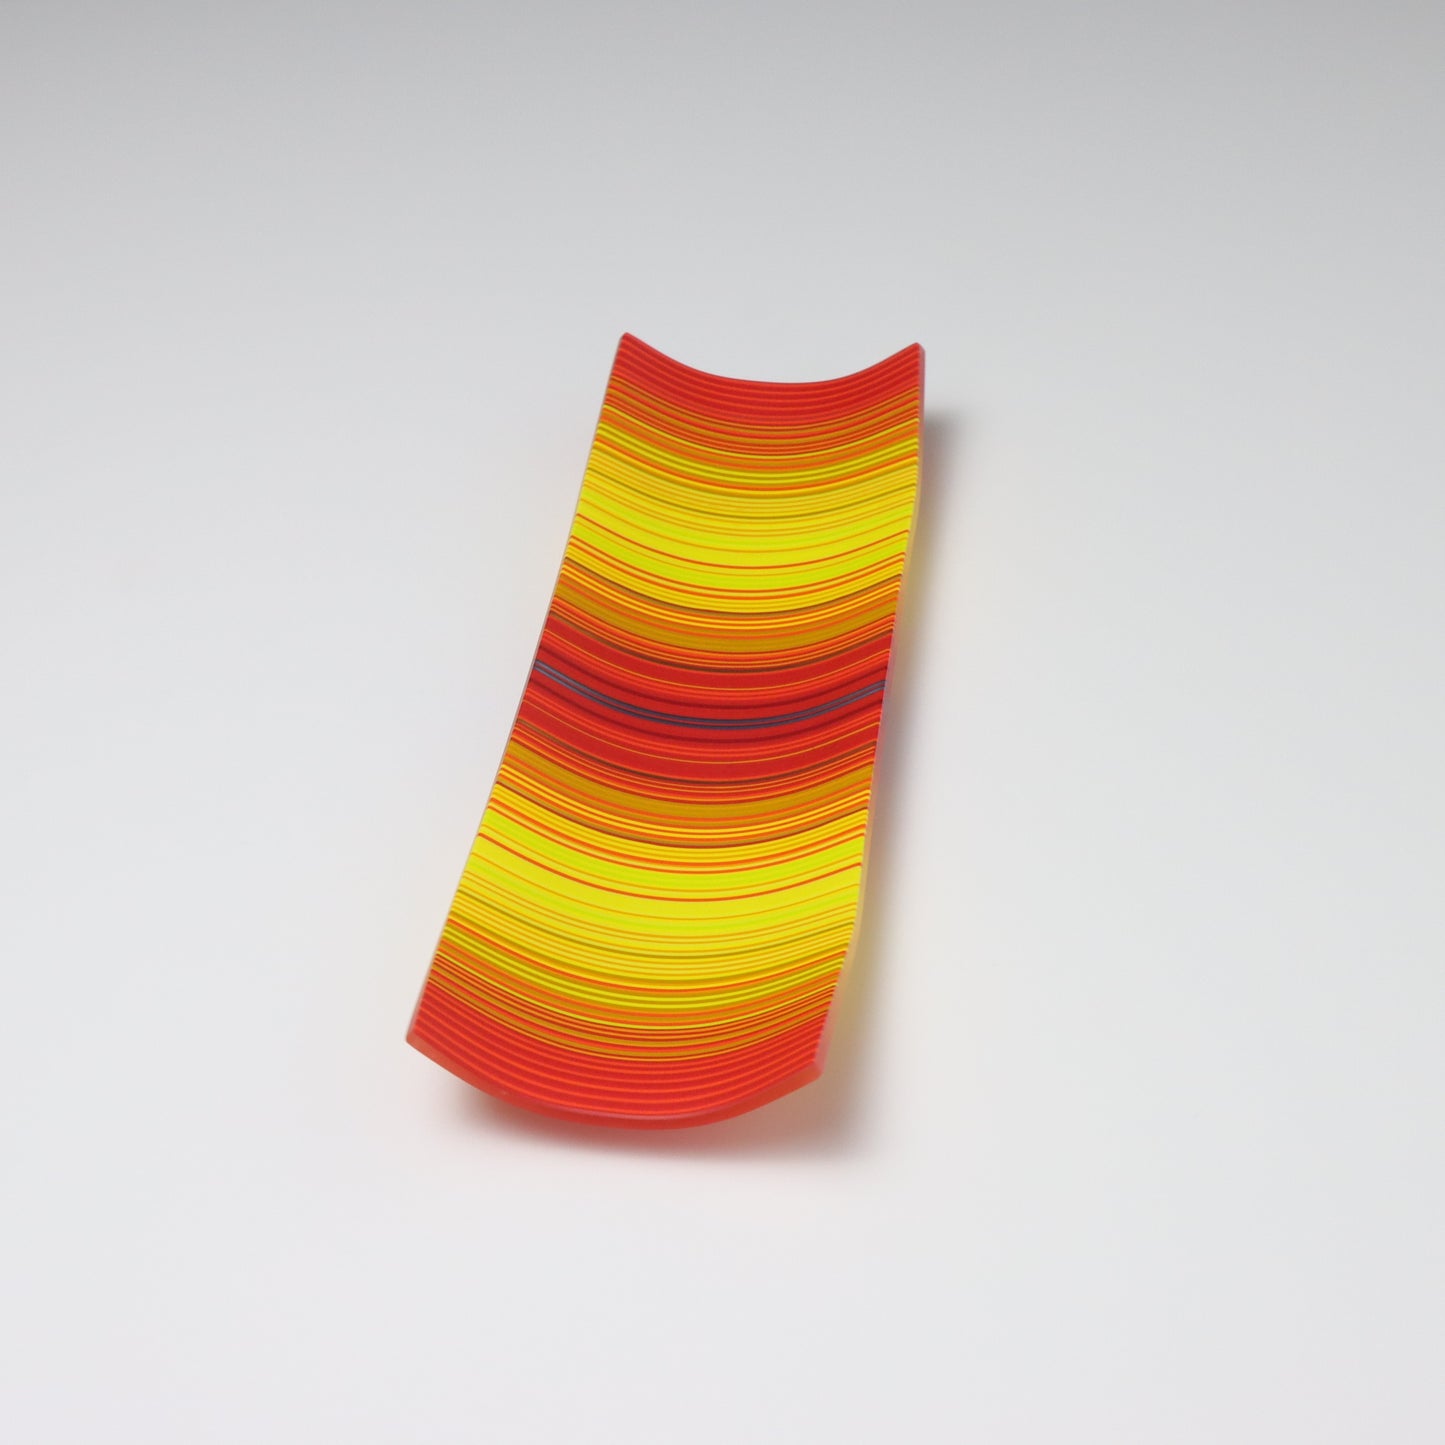 S2401 | Rectangular Shaped ColourWave Glass Plate | Red and Yellow